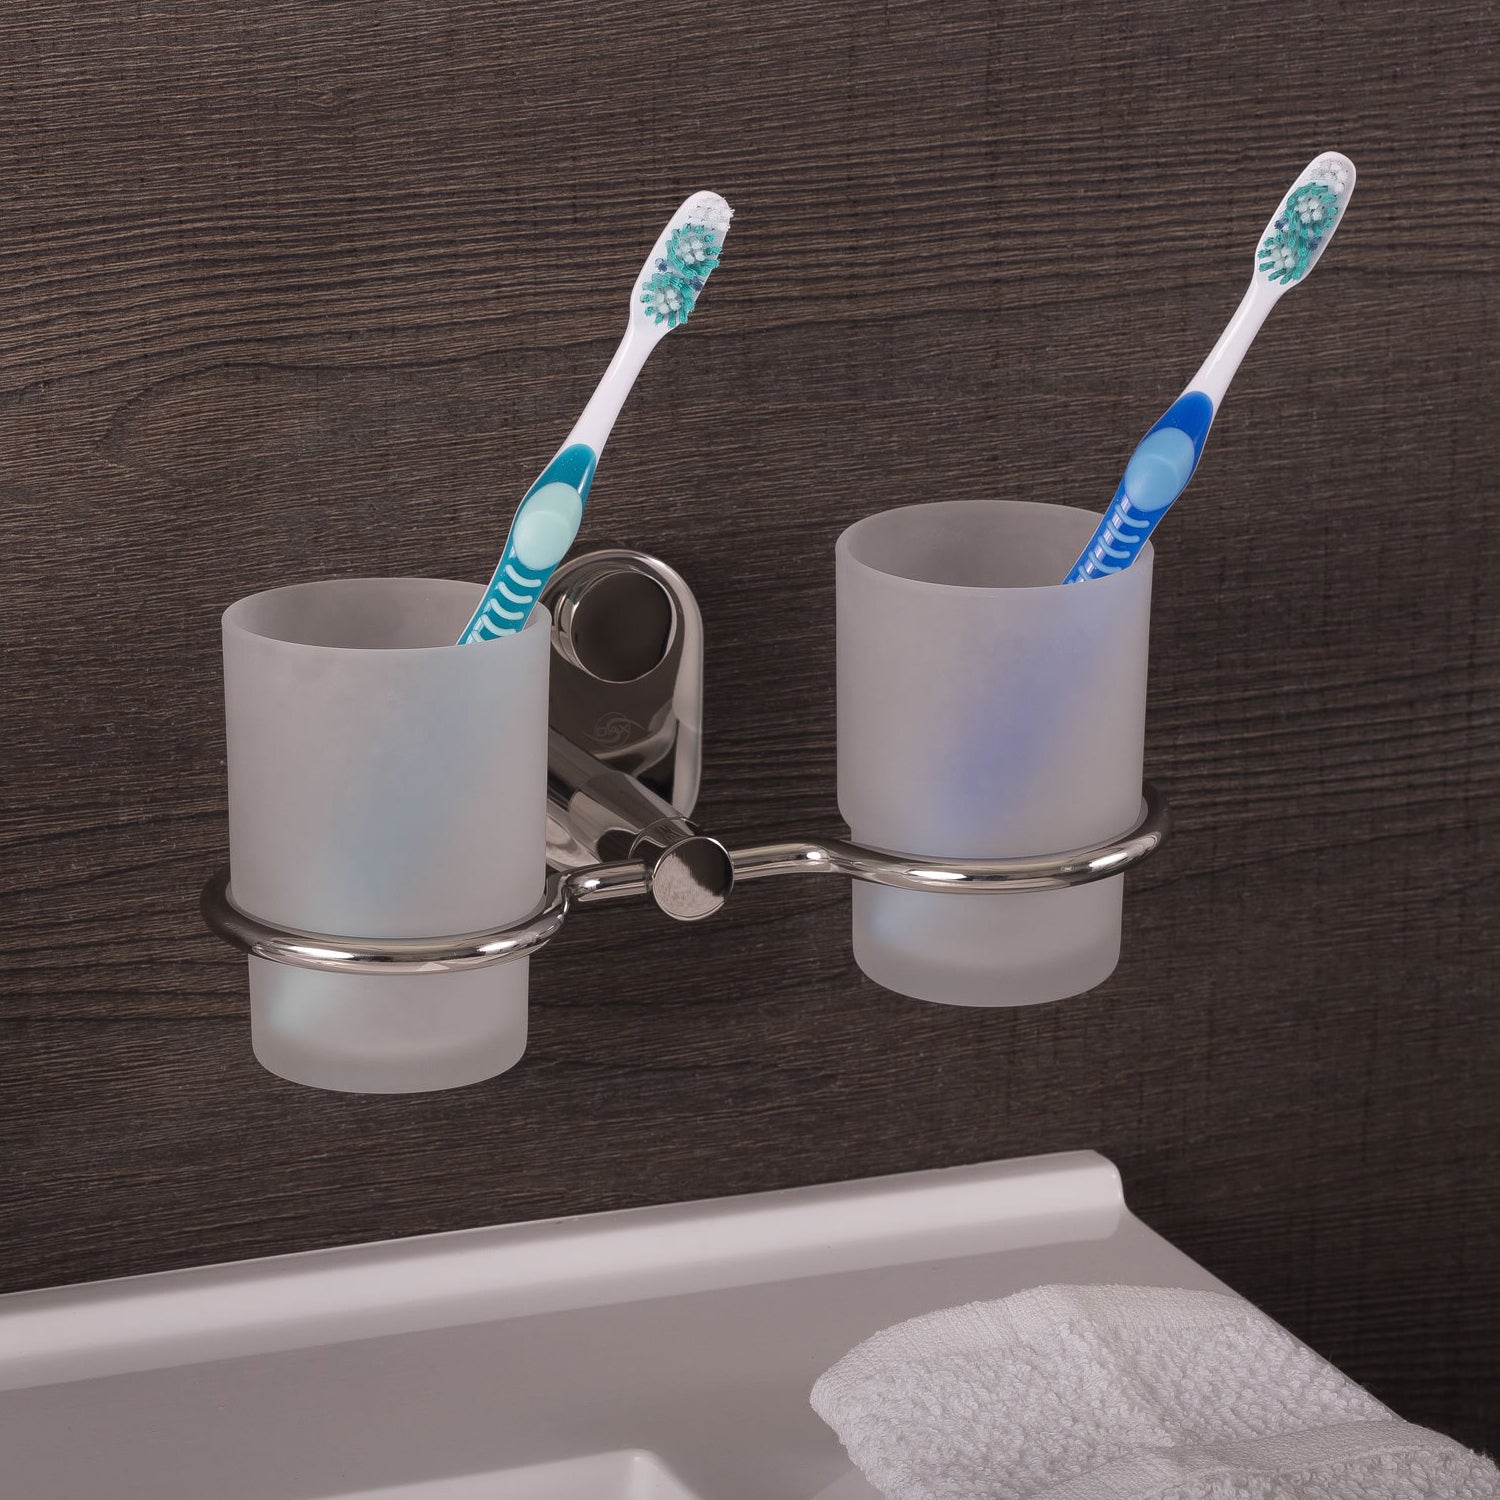 DAX Bathroom Double Tumbler Toothbrush Holder, Wall Mount Stainless Steel with Glass Cup, Polish Finish, 8-1/4 x 3-3/4 x 4-1/8 Inches (DAX-G0214-P)